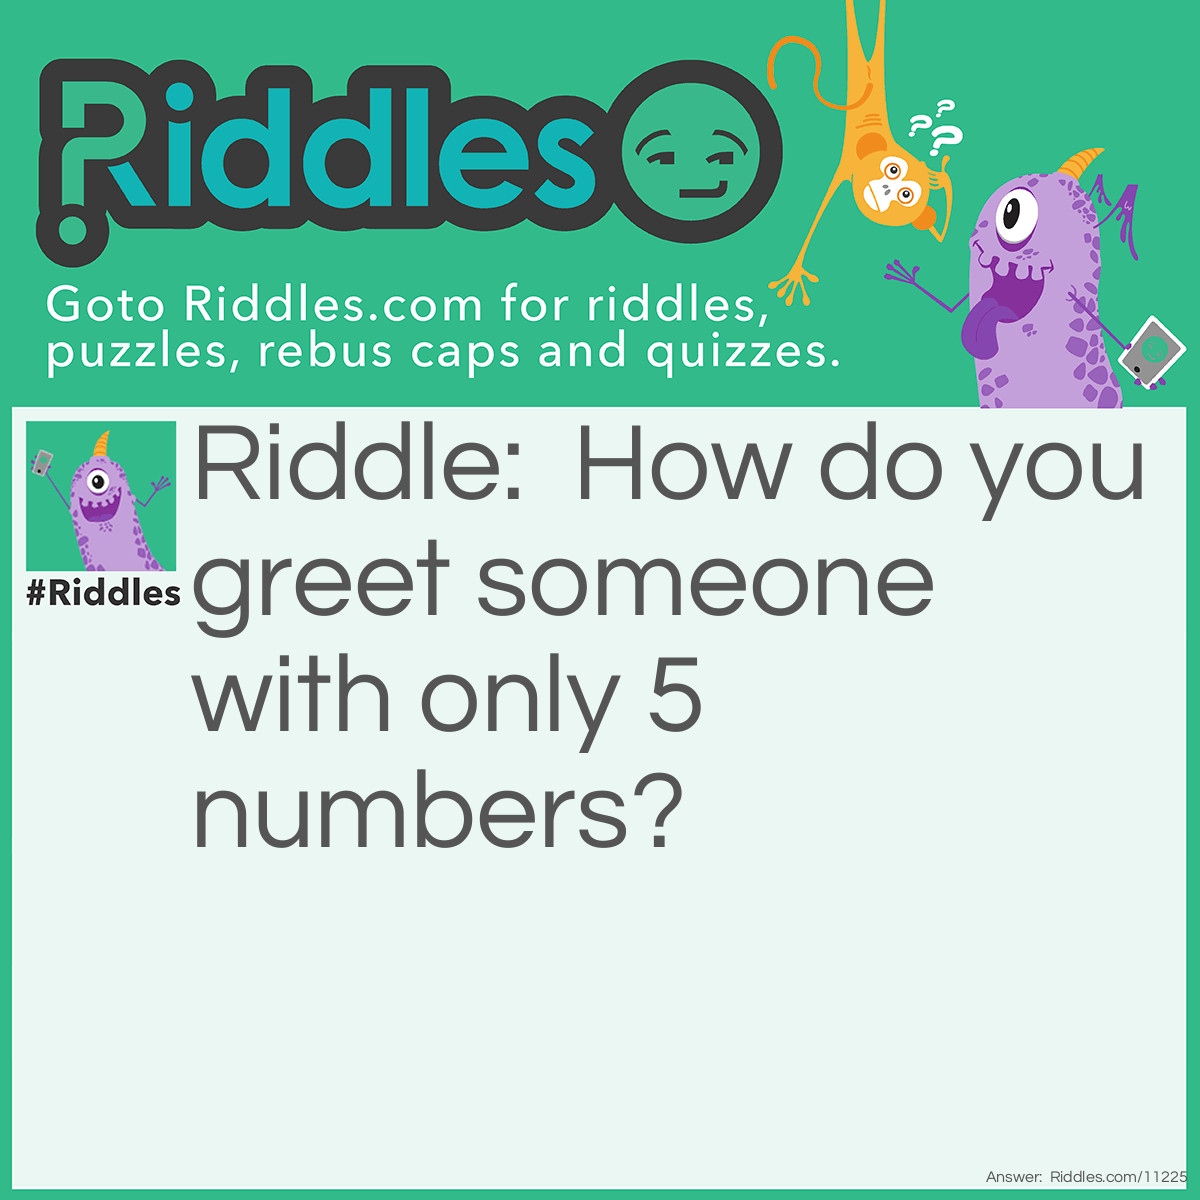 Riddle: How do you greet someone with only 5 numbers? Answer: 07734 ( on a calculator it spells out "Hello" when it's upside down)